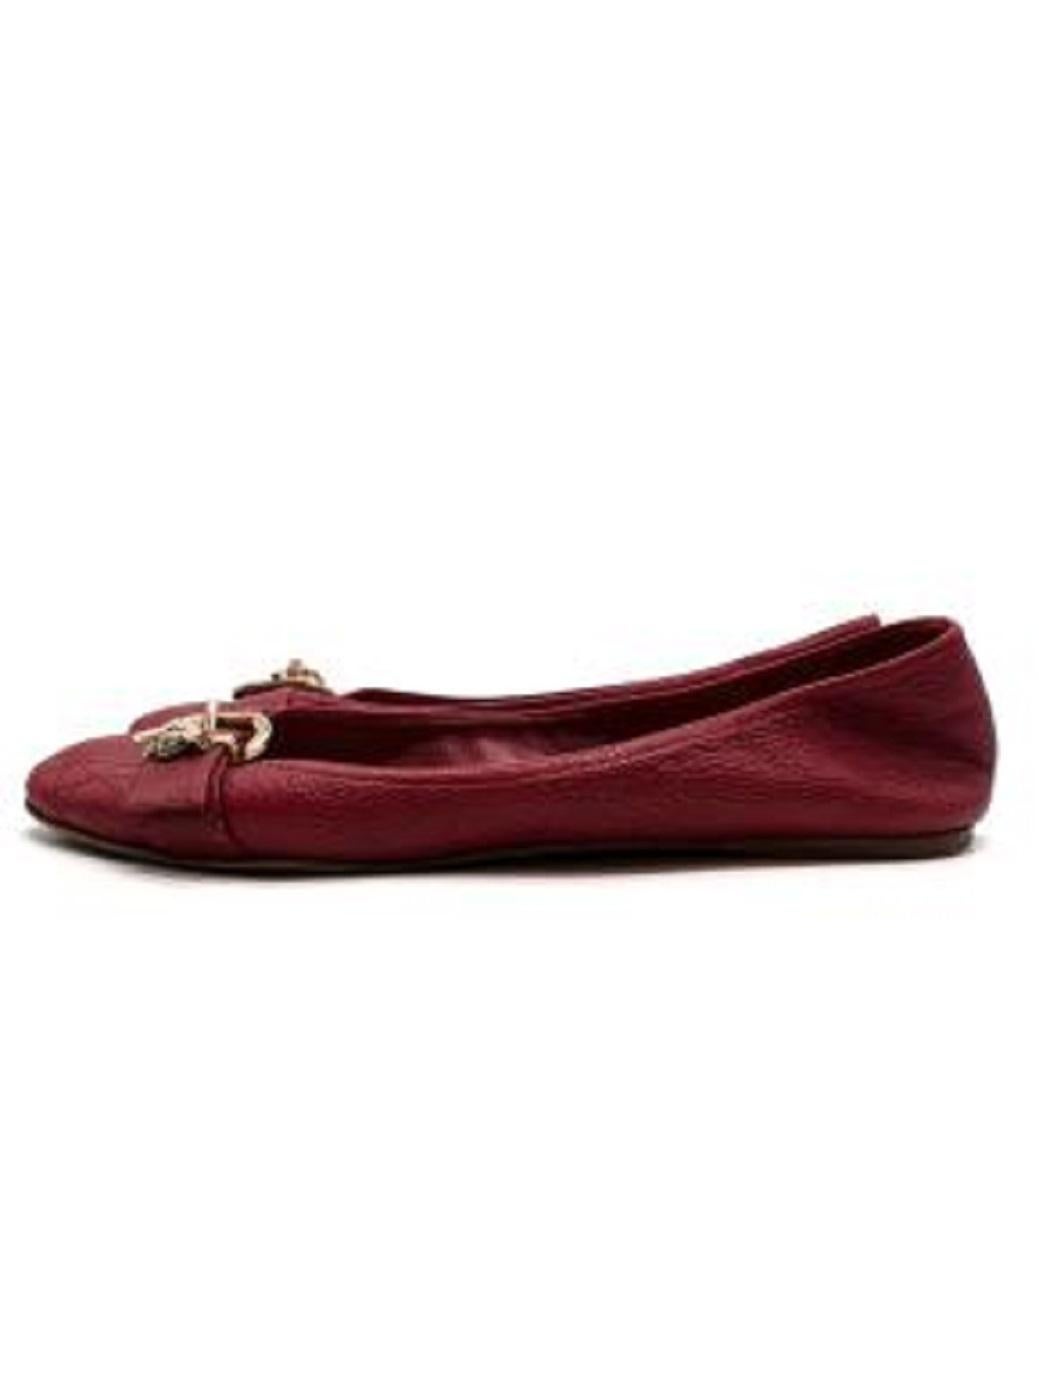 Women's Dior Bee Embellished Red Leather Ballerinas For Sale